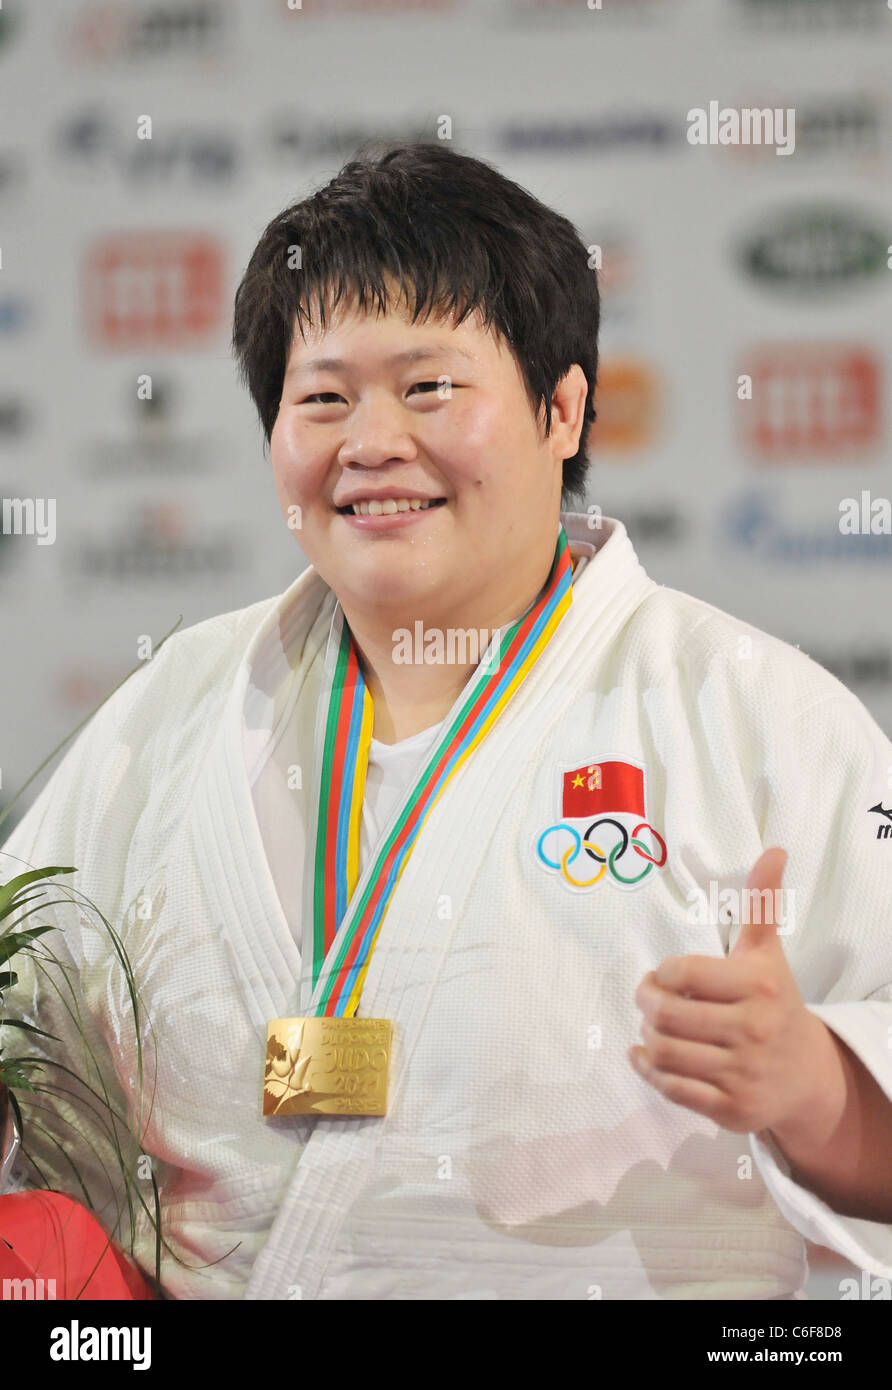 TONG, Wen (CHN) got a medal for the World Judo Championships Paris 2011  Stock Photo - Alamy